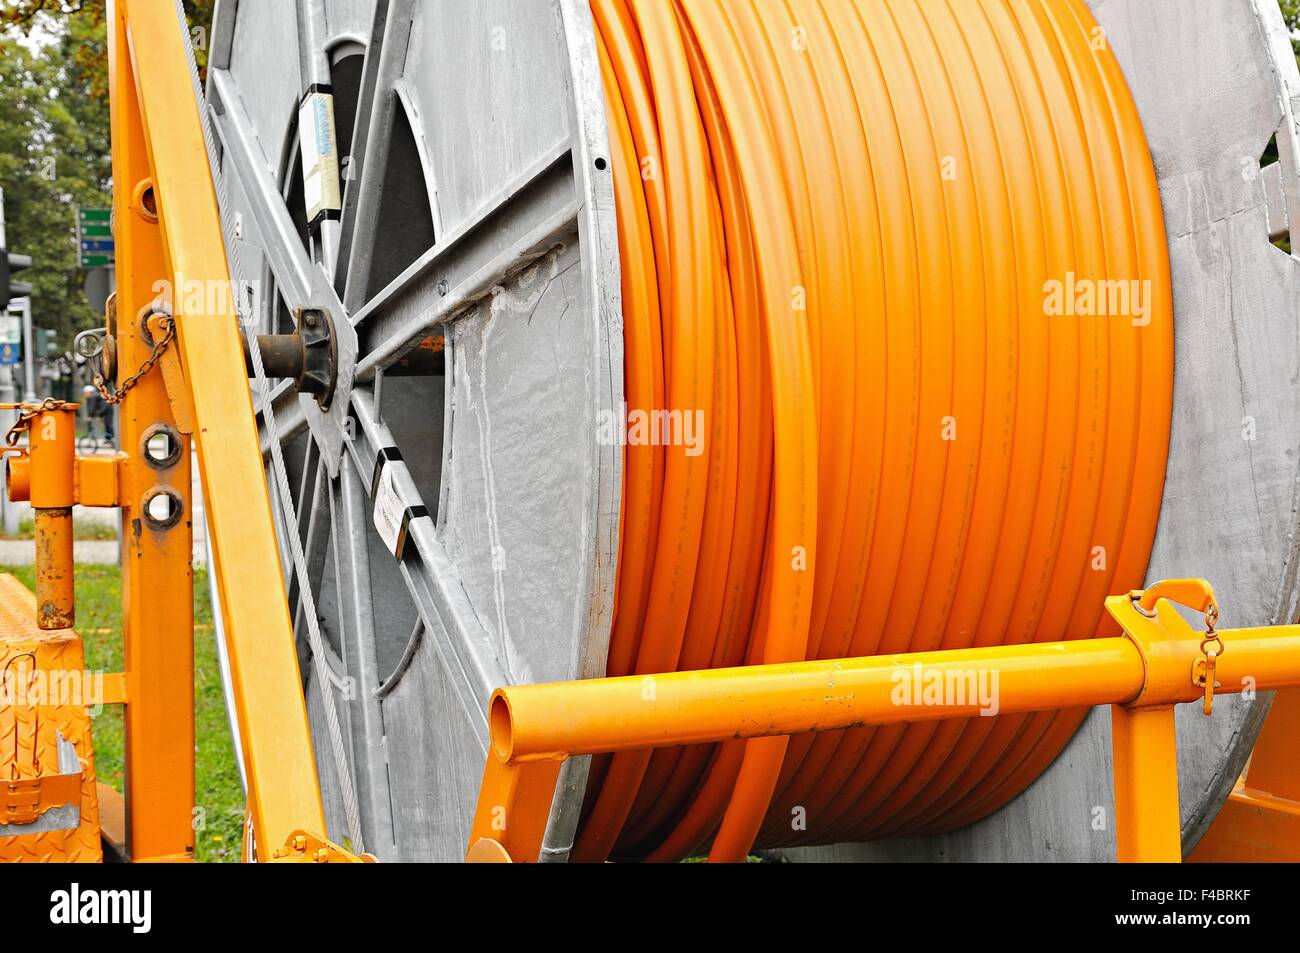 Broadband cable drum with laying trailer Stock Photo